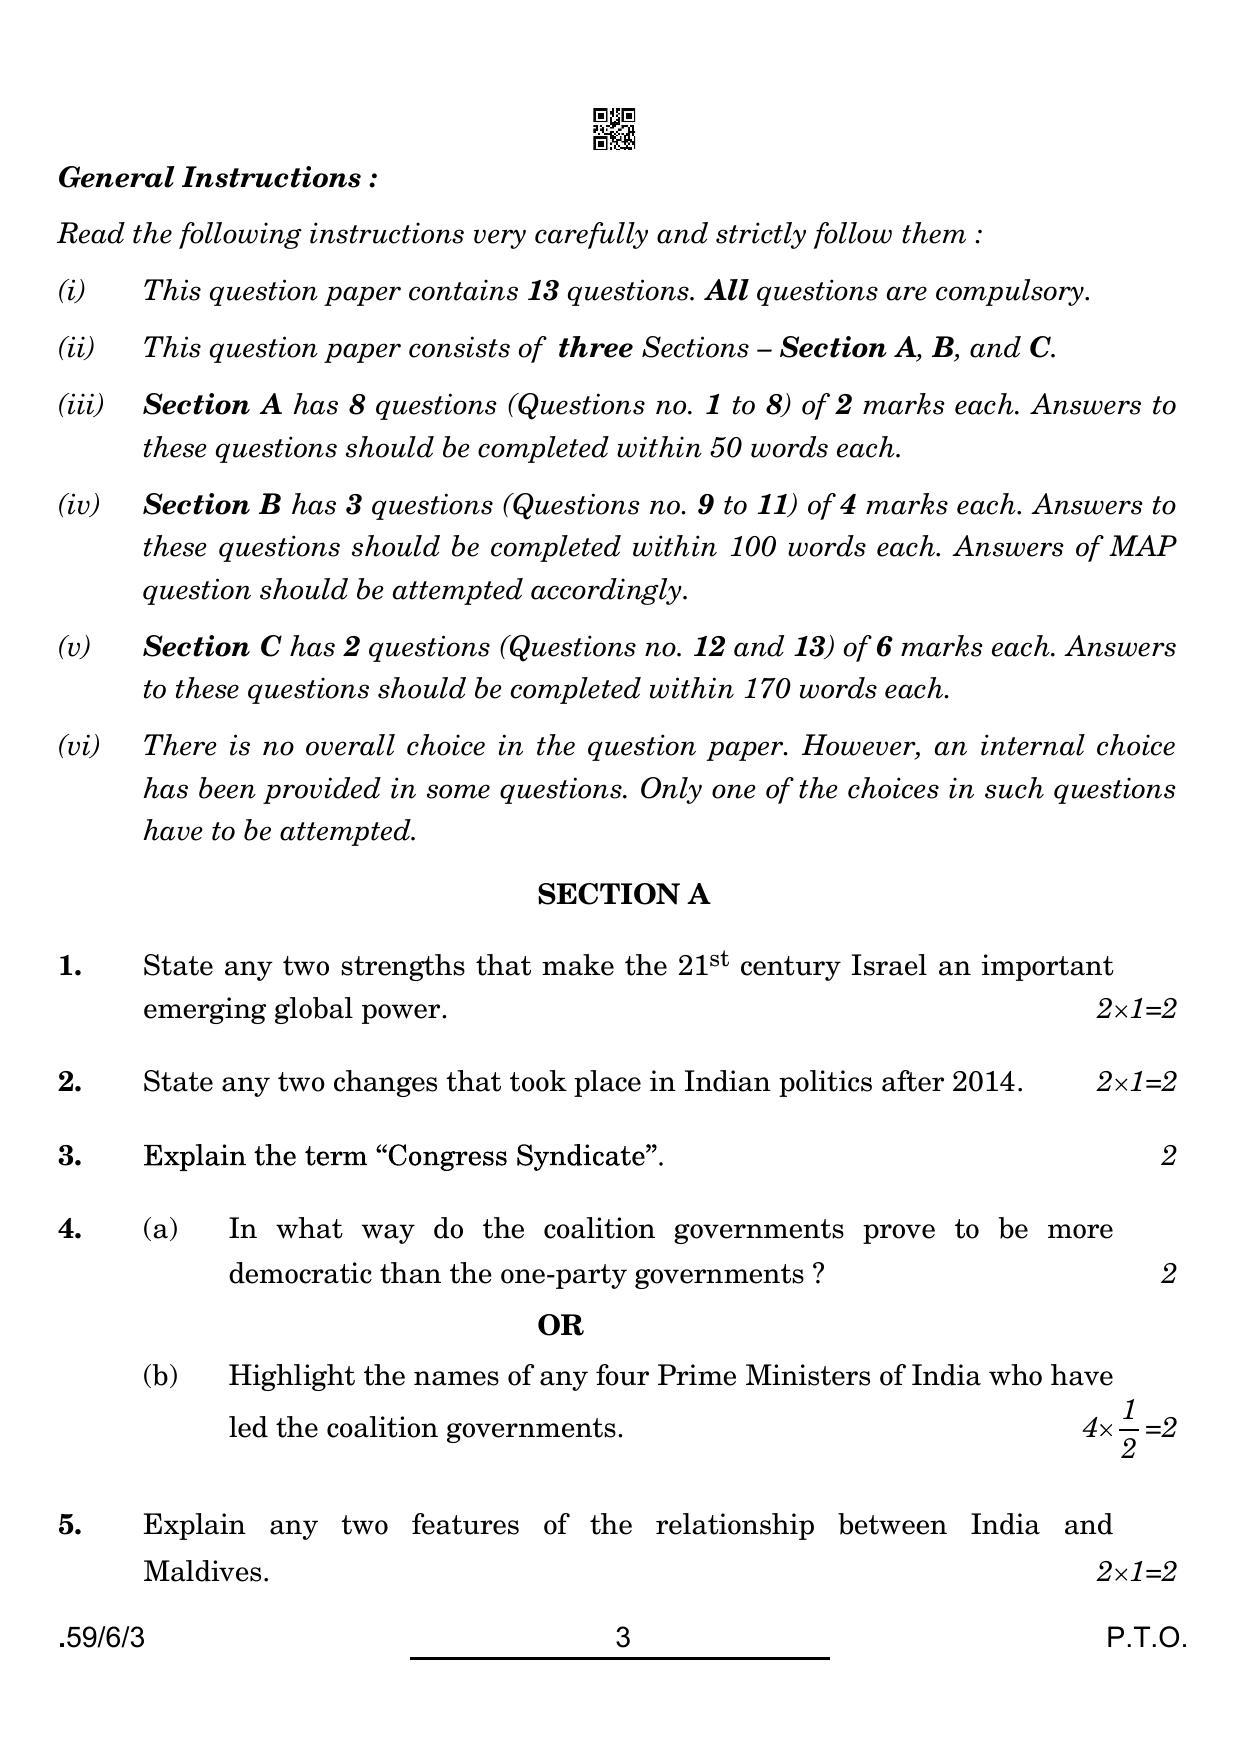 CBSE Class 12 59-6-3 POL SCIENCE 2022 Compartment Question Paper - Page 3